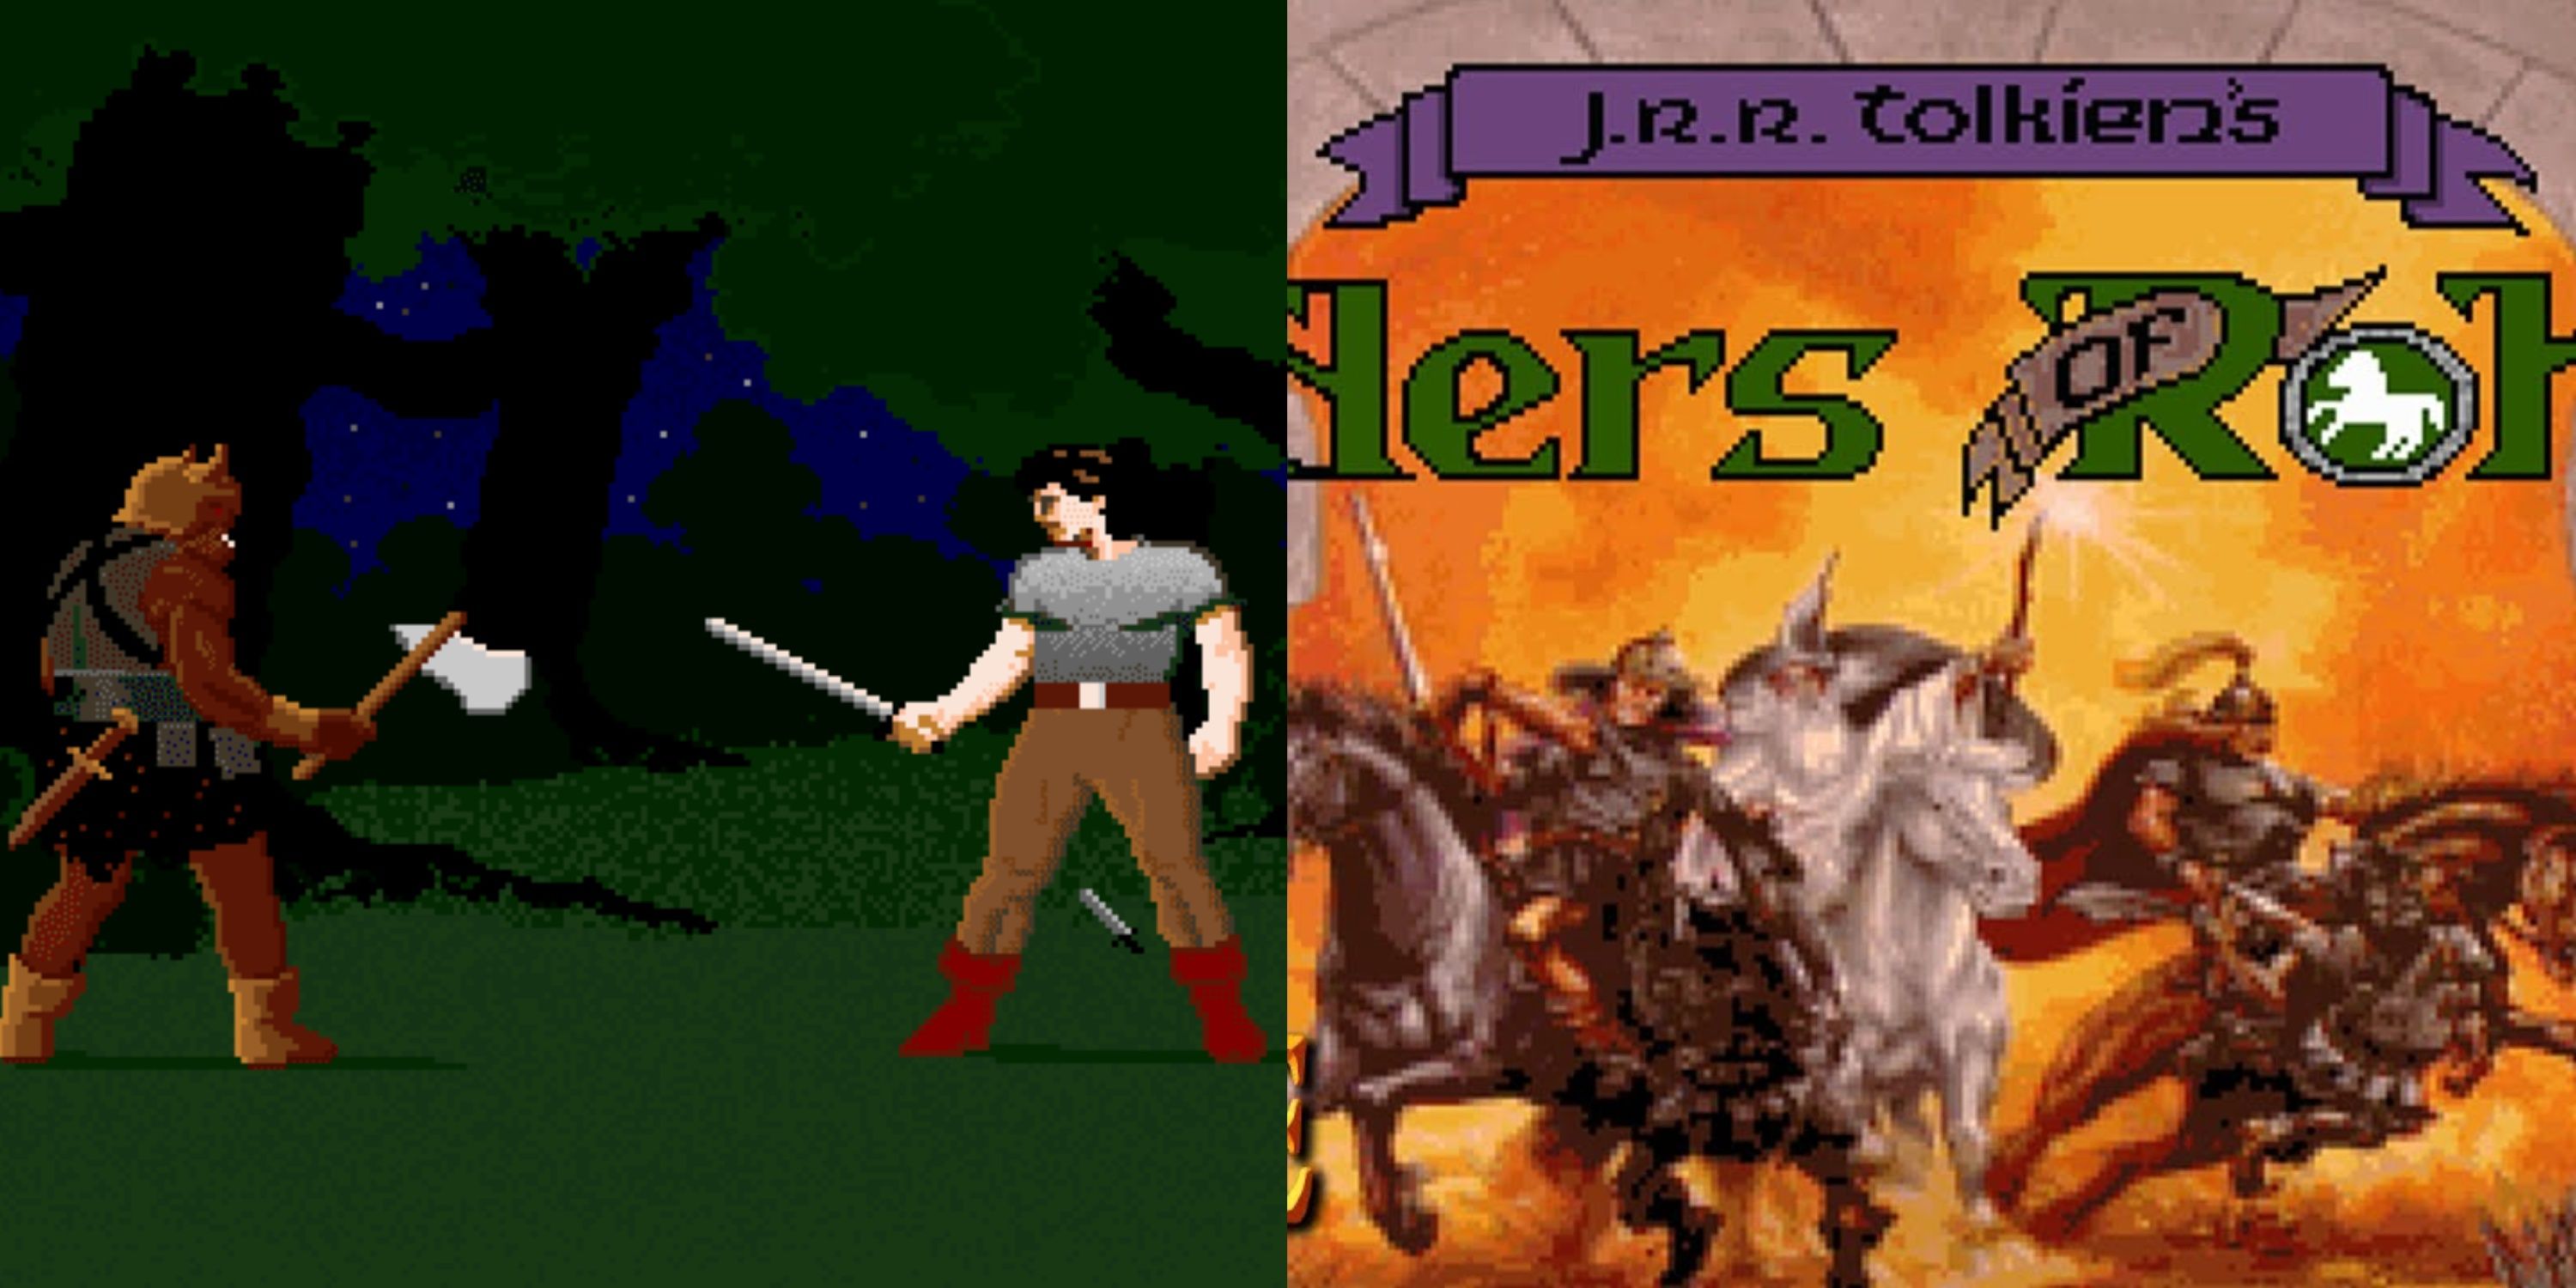 J.R.R. Tolkien's Riders of Rohan computer game